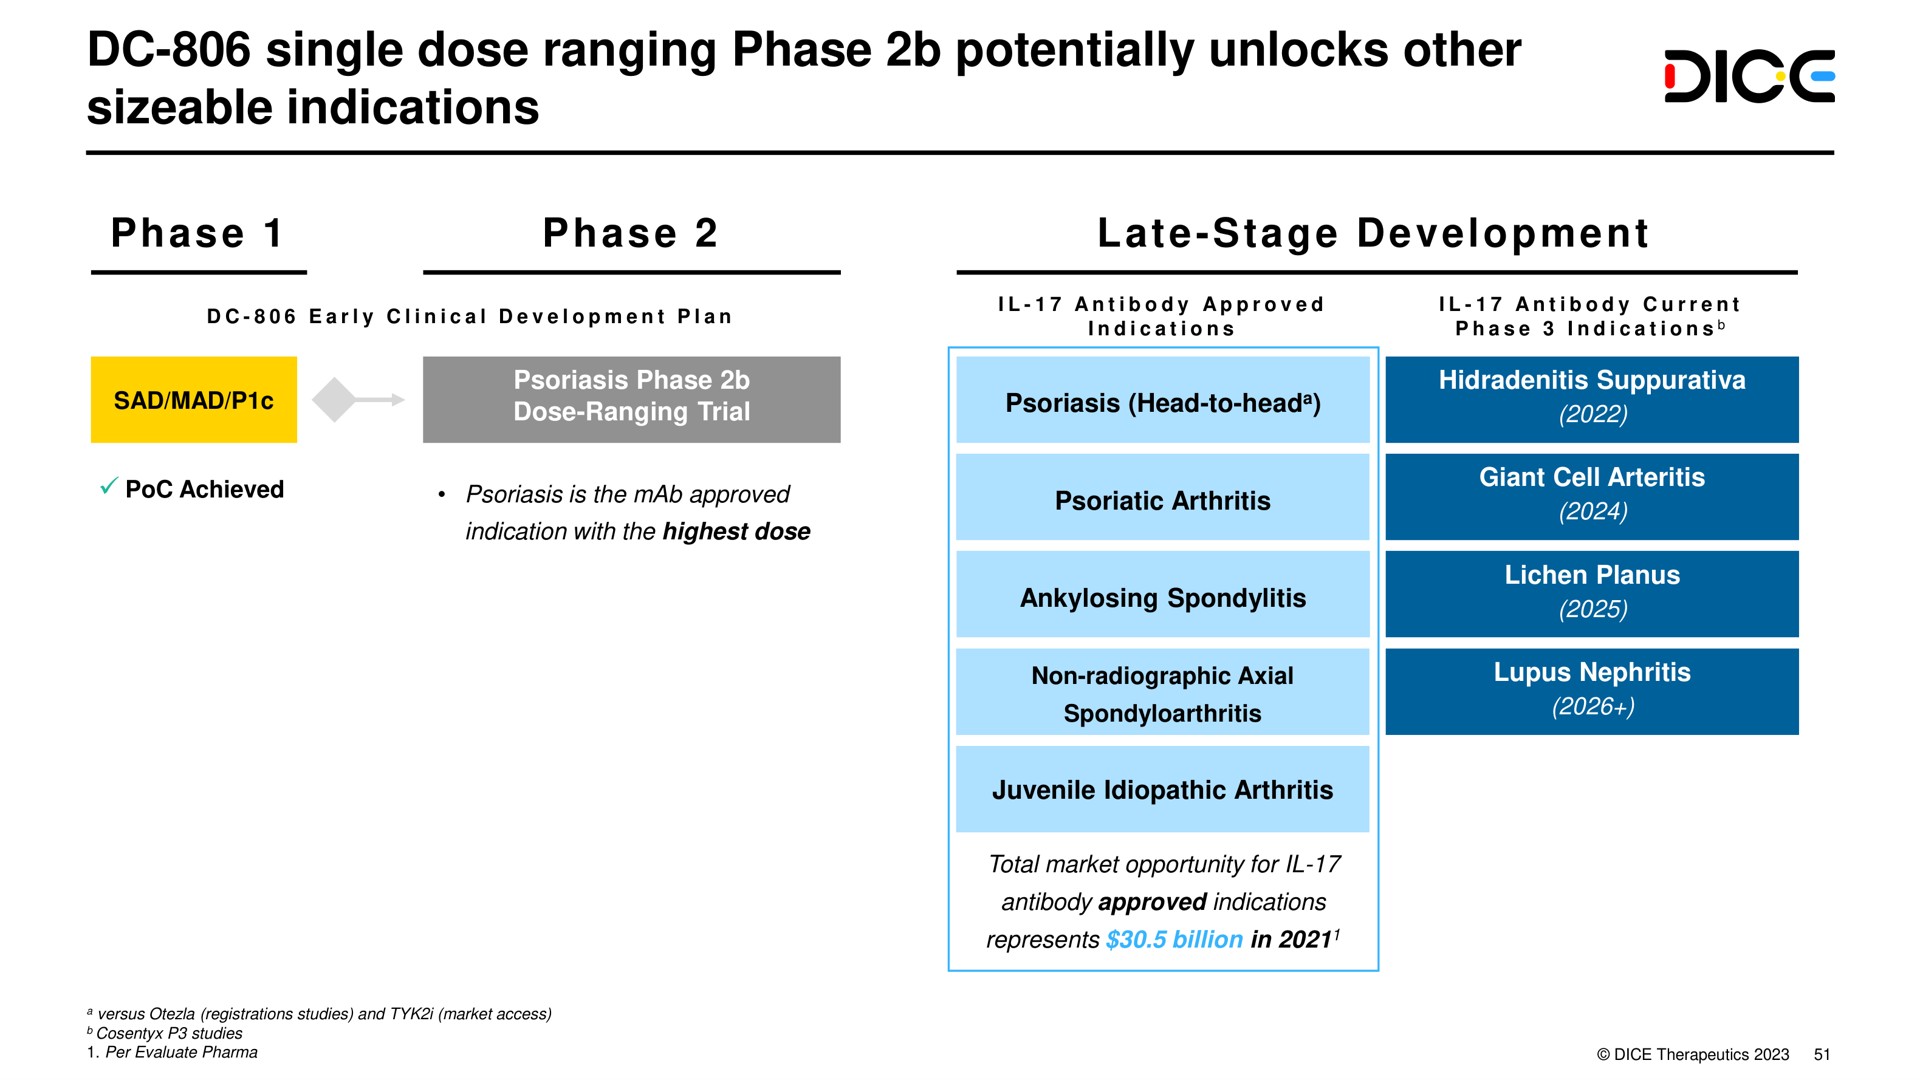 single dose ranging phase potentially unlocks other sizeable indications | DICE Therapeutics